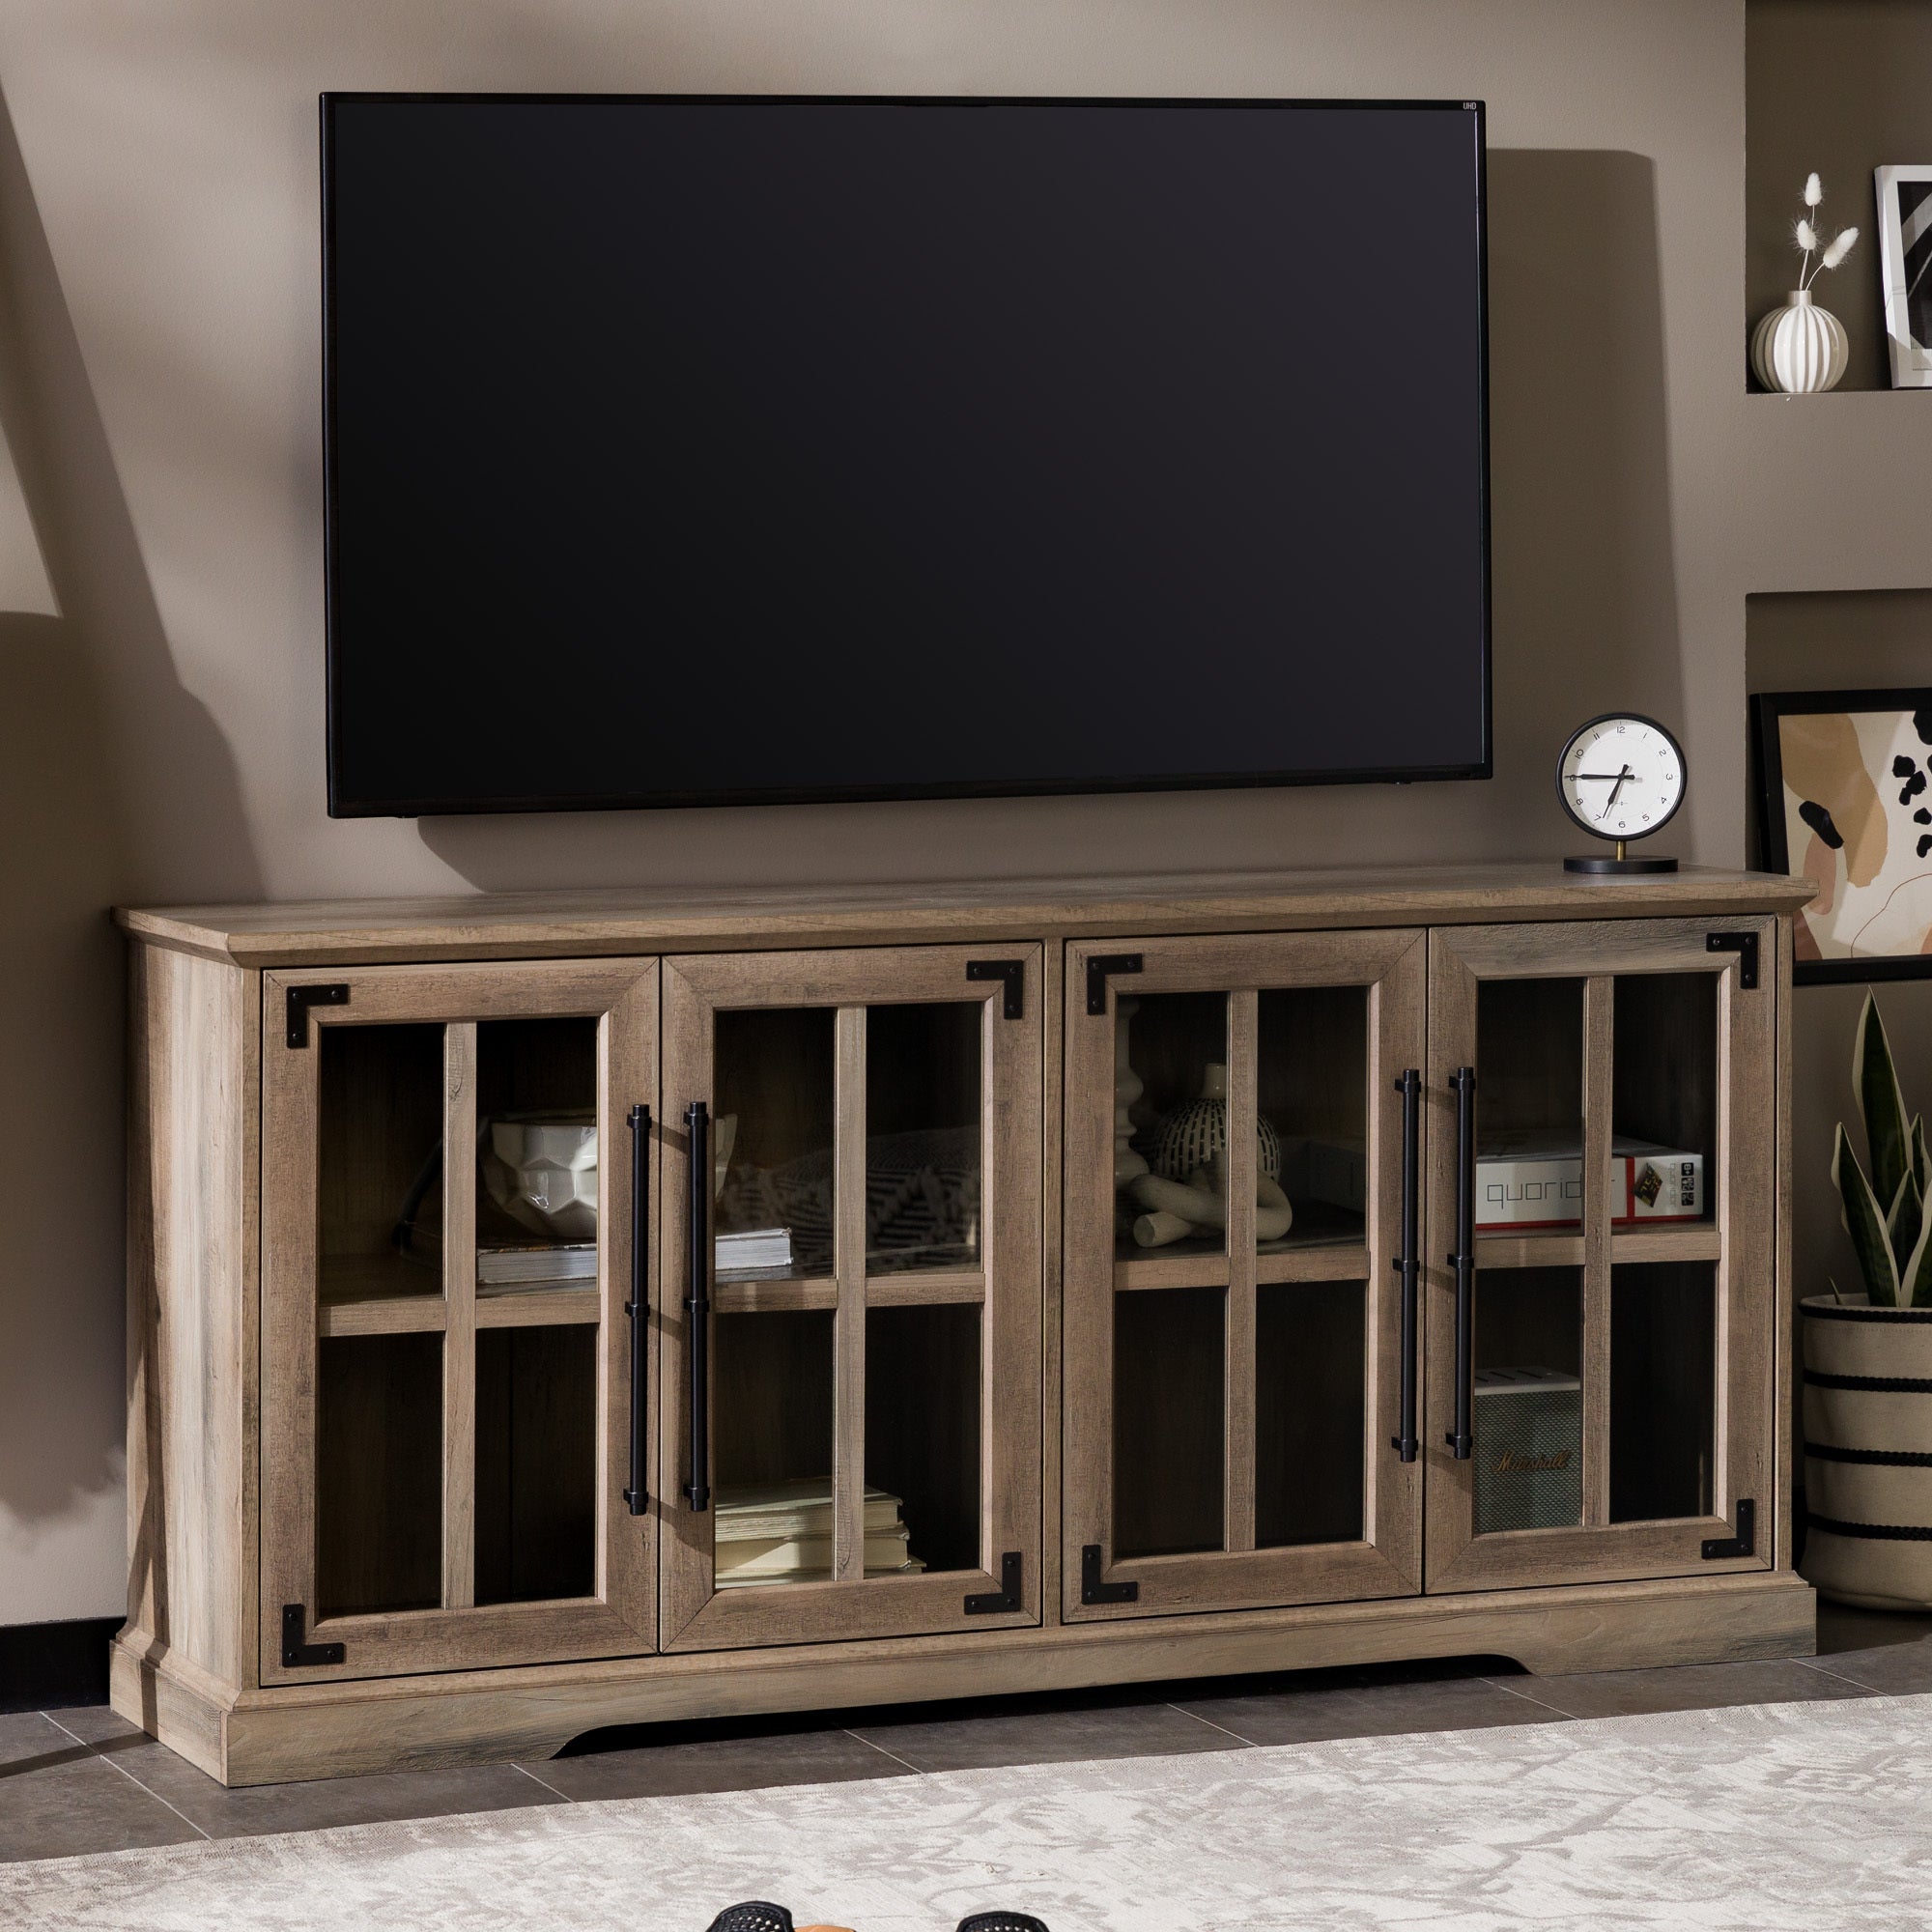 Modern Farmhouse Windowpane Glass-Door TV Stand for TVs up to 65"